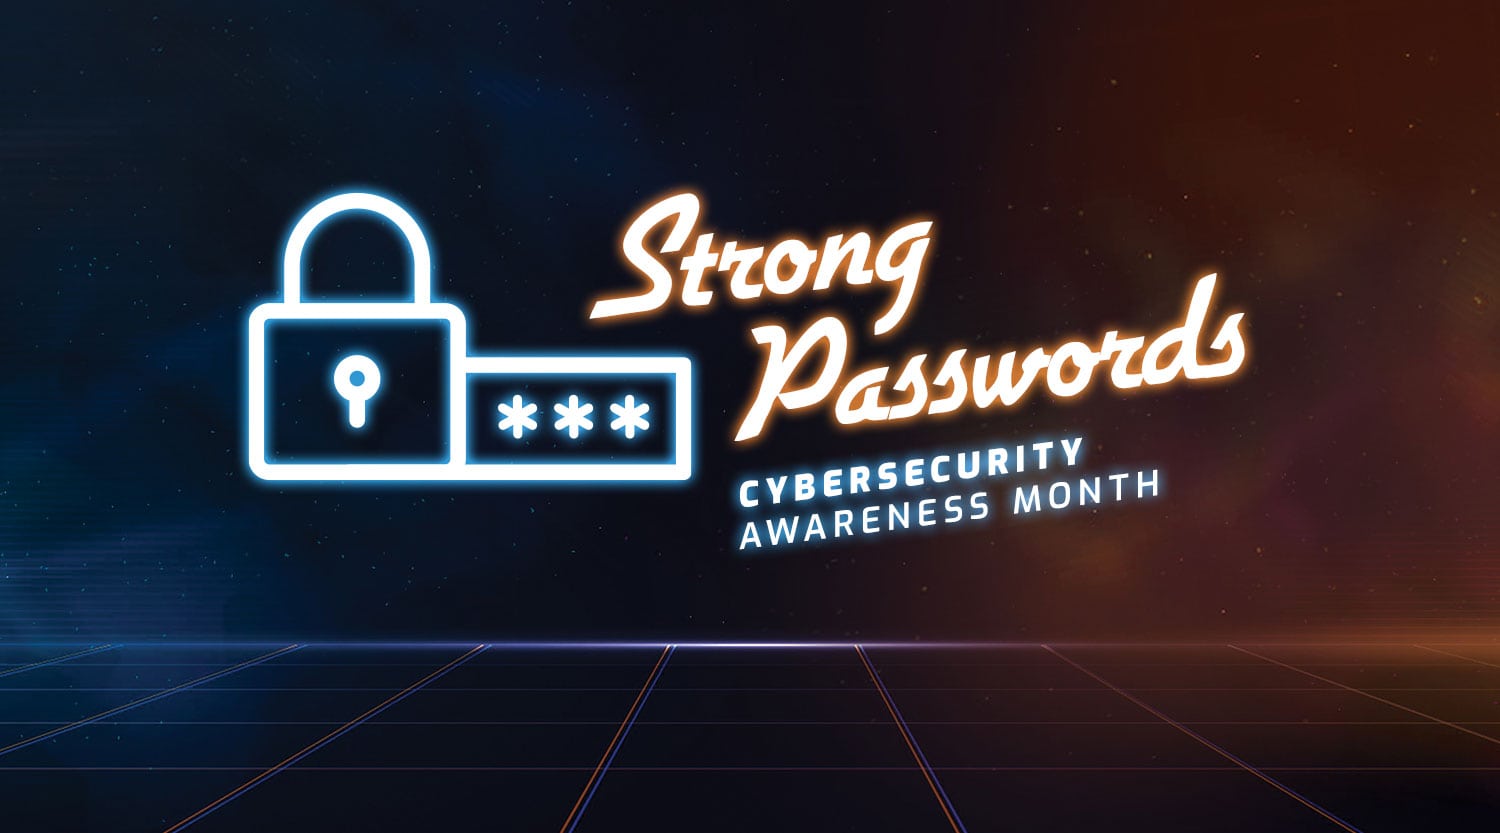 Lock symbol for cybersecurity awareness month